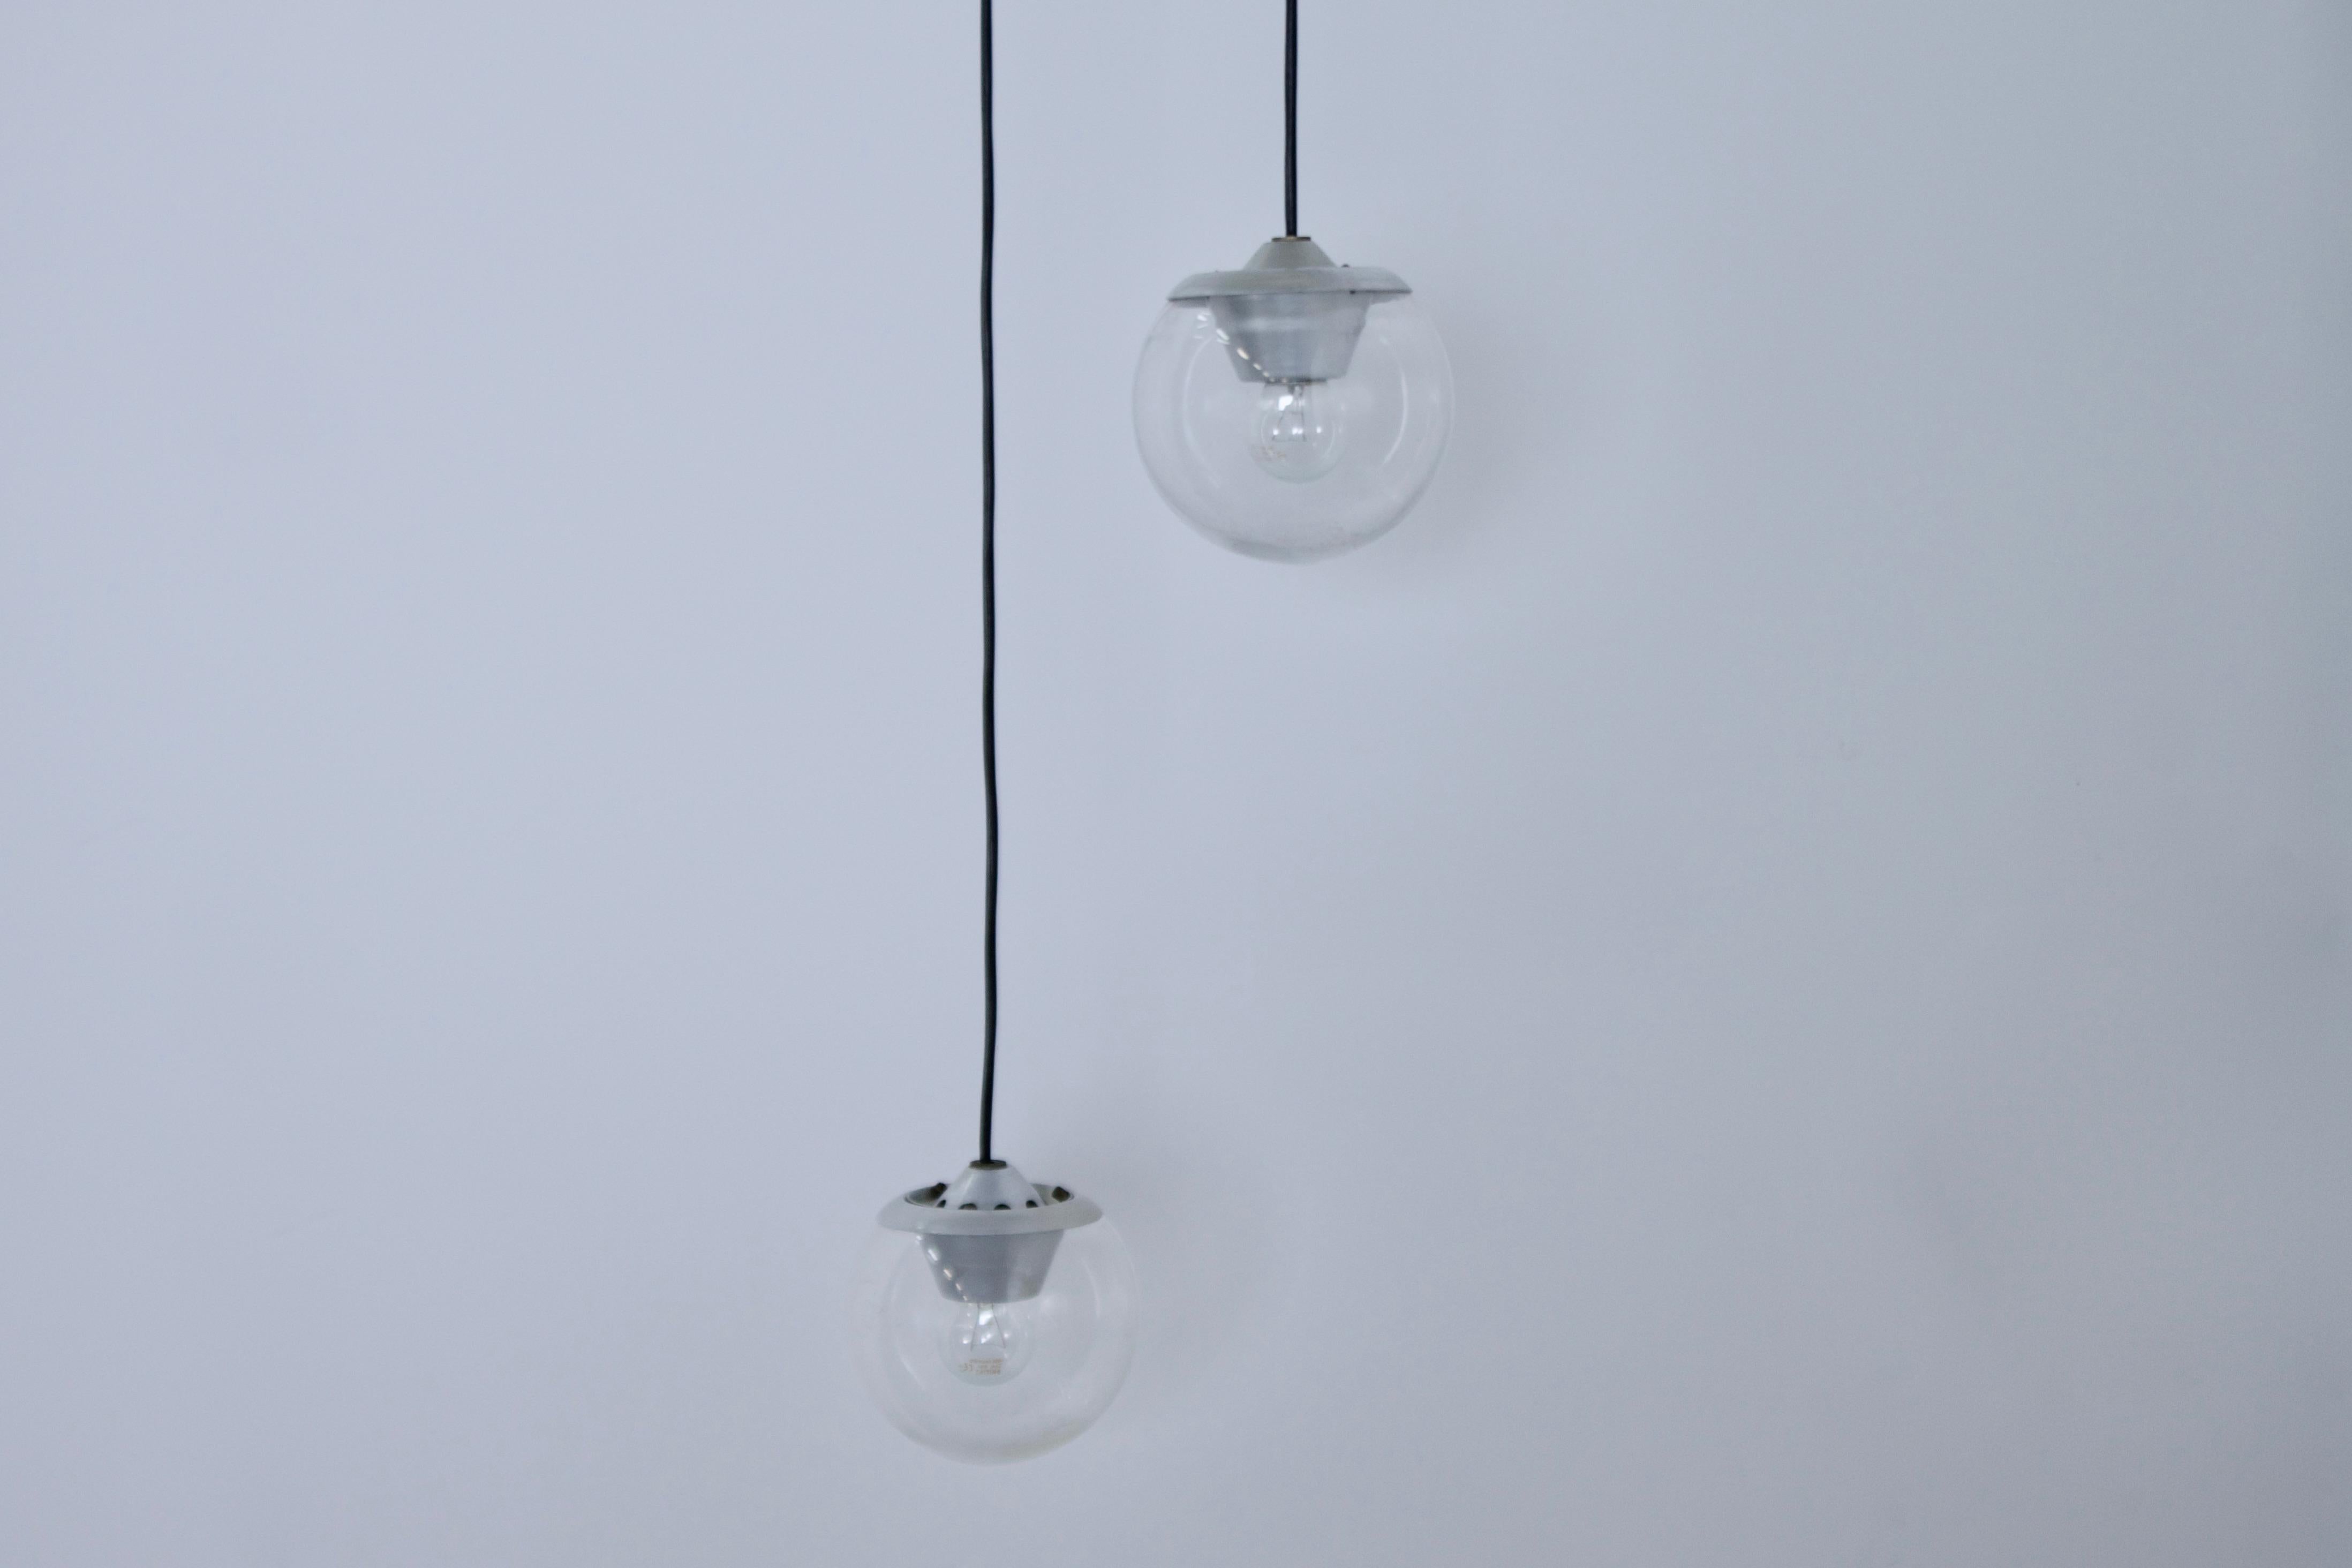 Beautiful original model 2095/1 pendants in very good original condition.

Designed by Gino Sarfatti in 1958.

Manufactured by Arteluce, Italy.

There are 35 of these pendants available.

The lamps have an aluminum shade holder which holds a